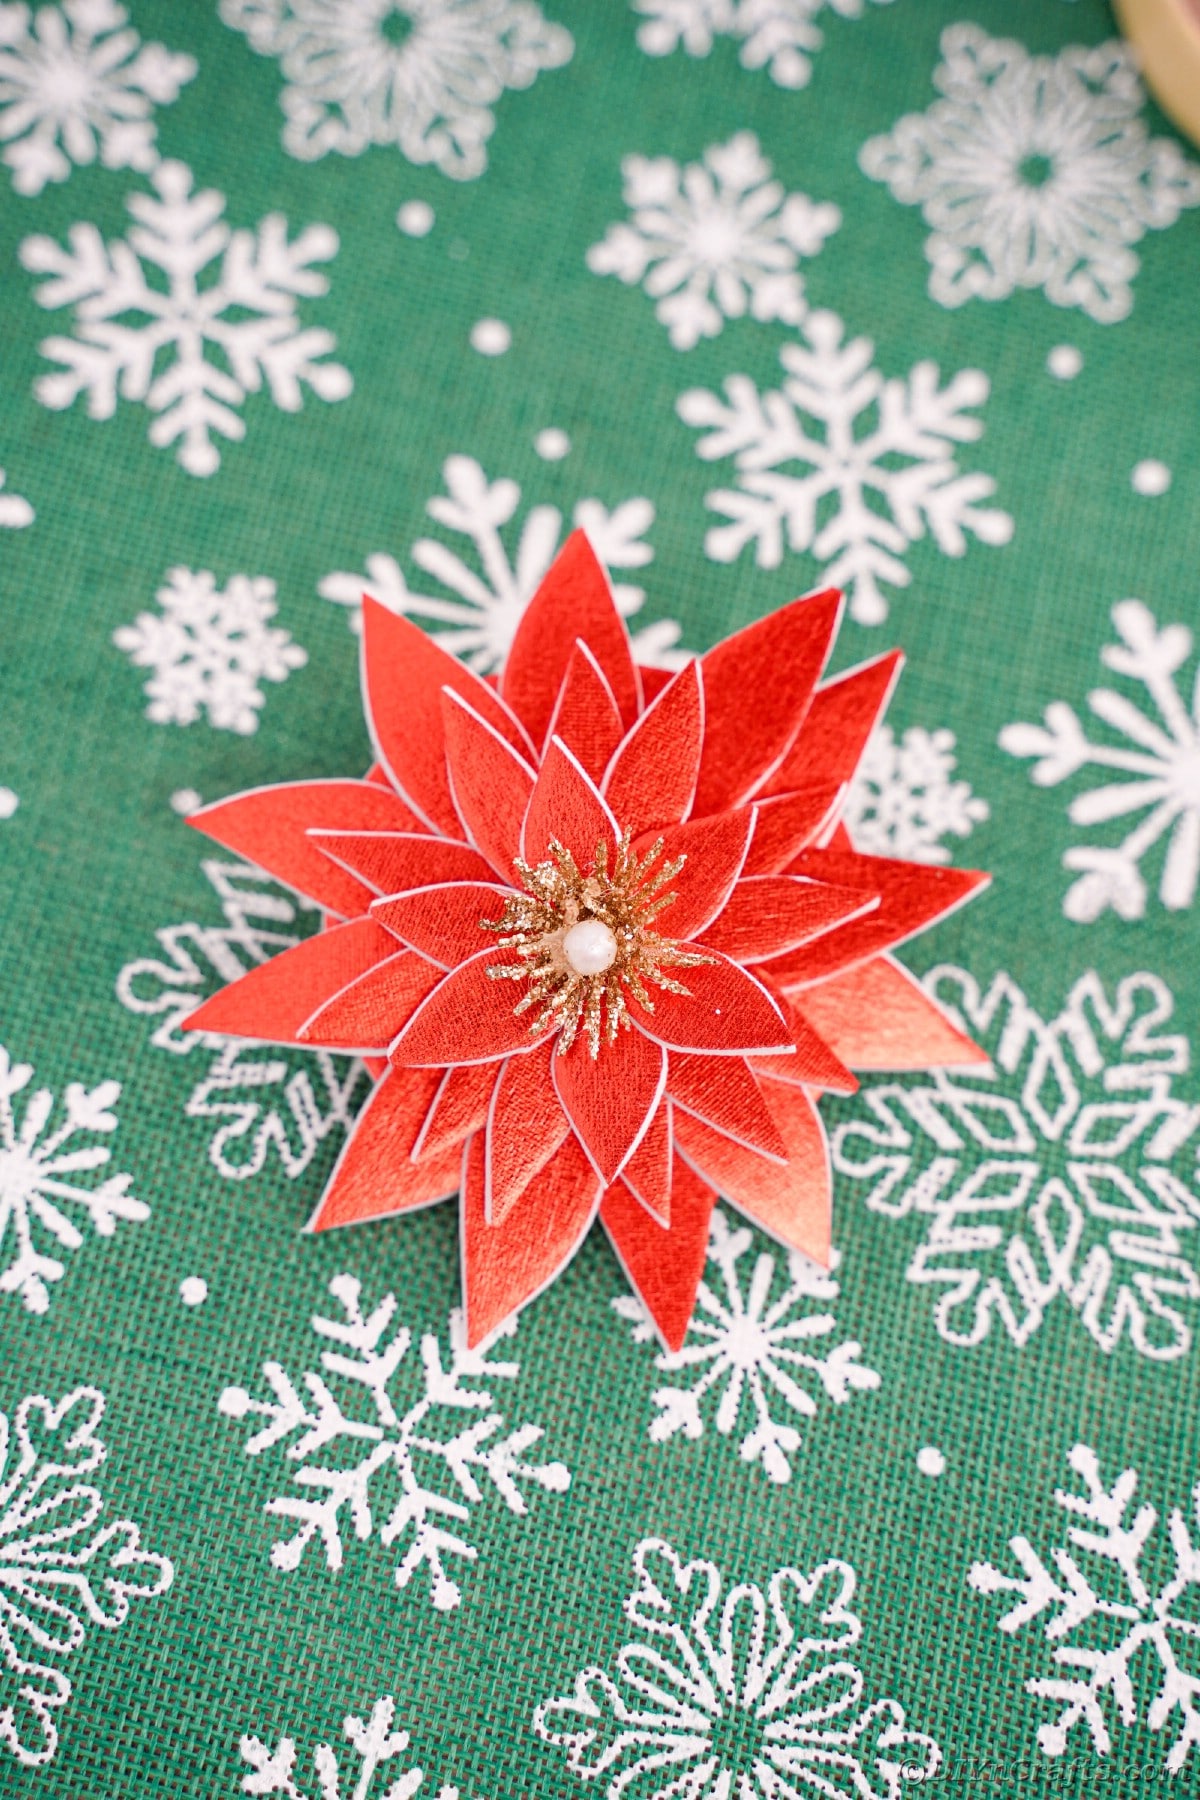 green and white snowflake paper with fake flower on top